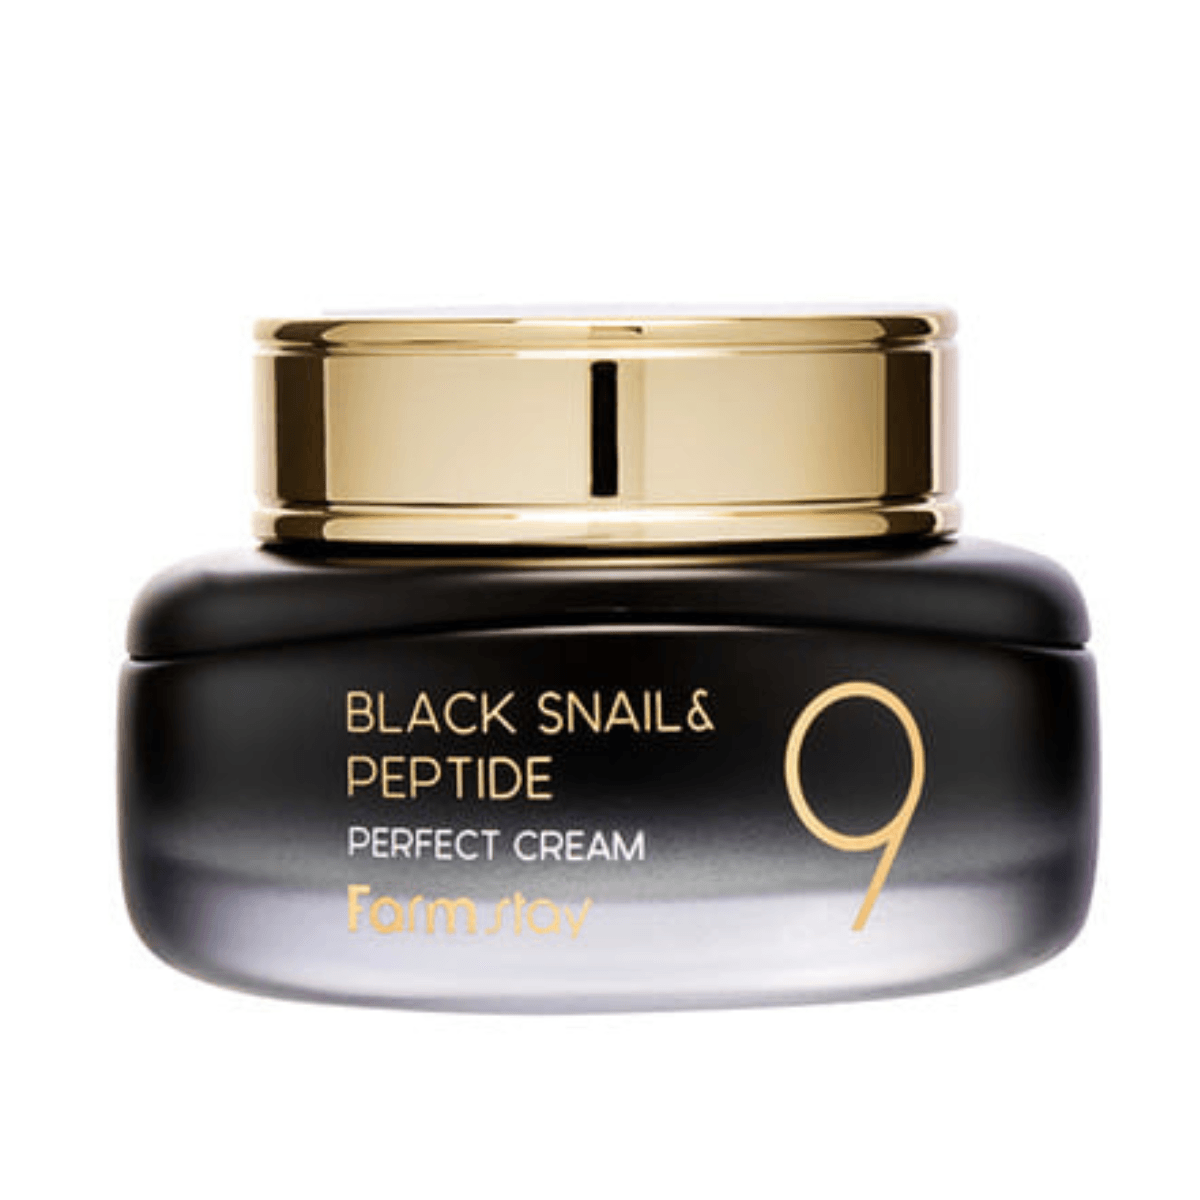 Farmstay Black Snail & Peptide 9 Perfect Cream Fights aging, improves elasticity, moisturizes, brightens and reduces wrinkles